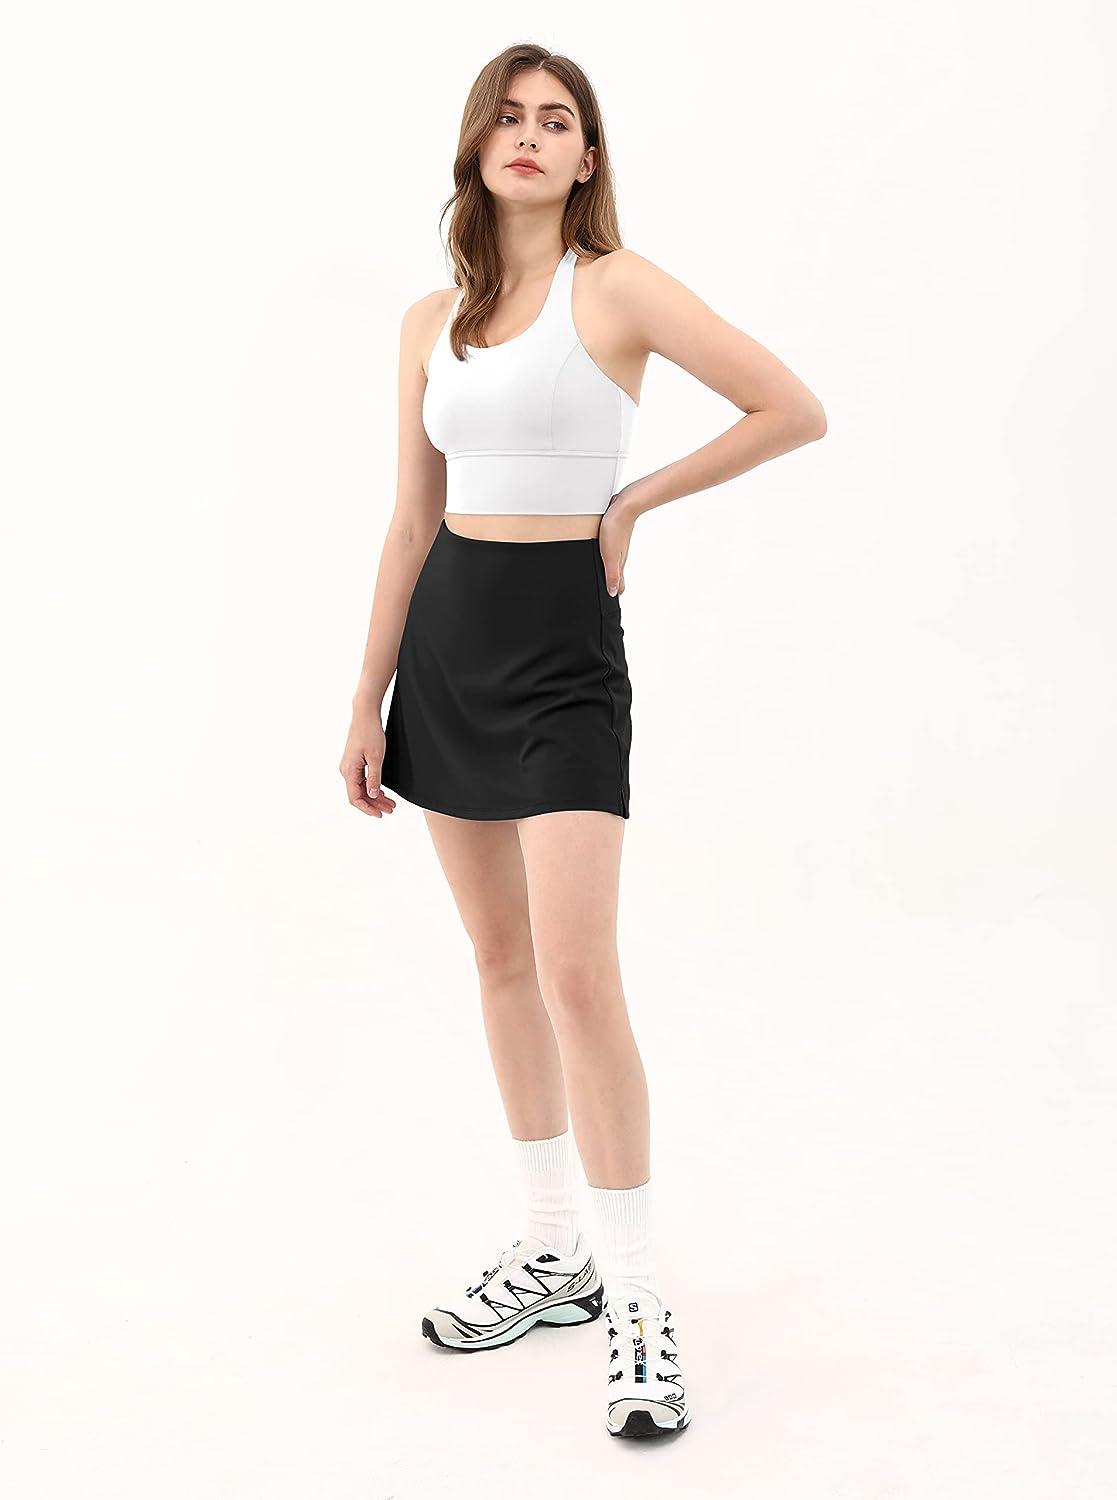 ODODOS Women's Athletic Tennis Skorts with Pockets Built-in Shorts